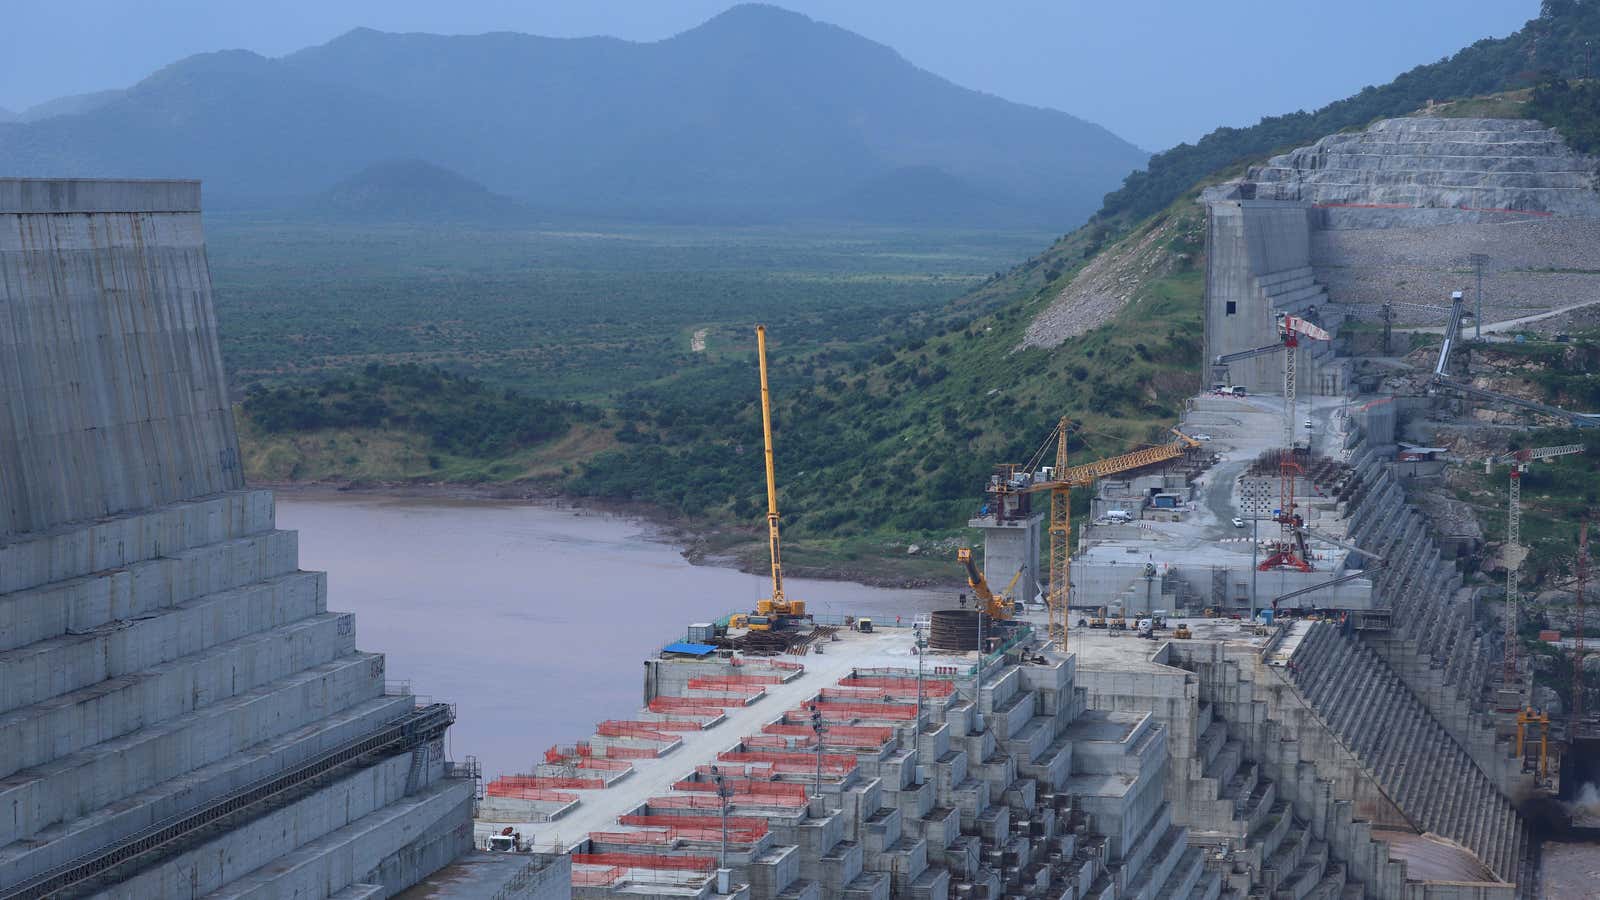 Ethiopia’s Grand Renaissance Dam is under construction on the river Nile in Sept. 26, 2019.